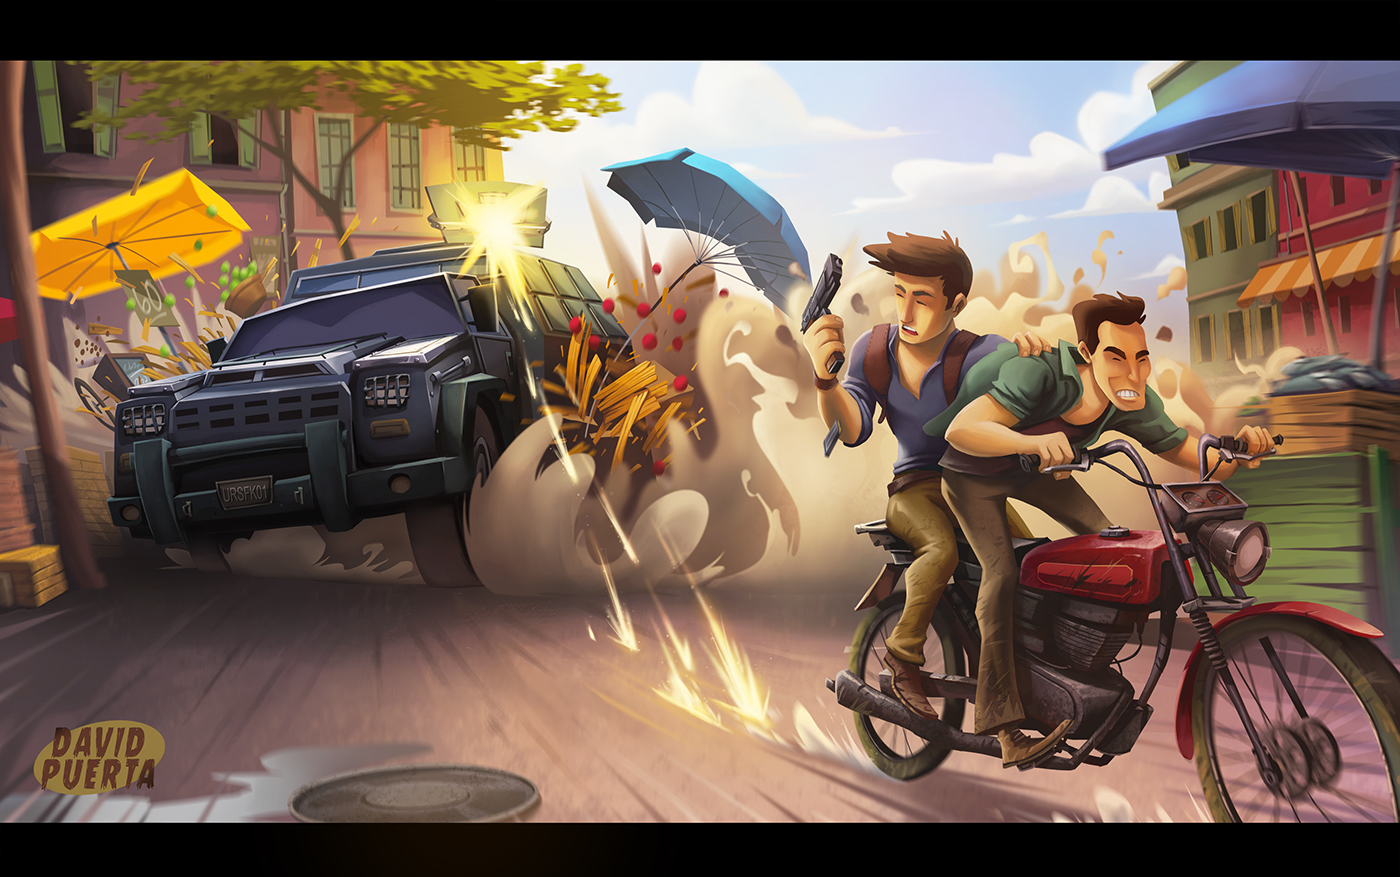 uncharted,Uncharted 4,fanart,artwork,Character,adventure,Цифровое искусство...